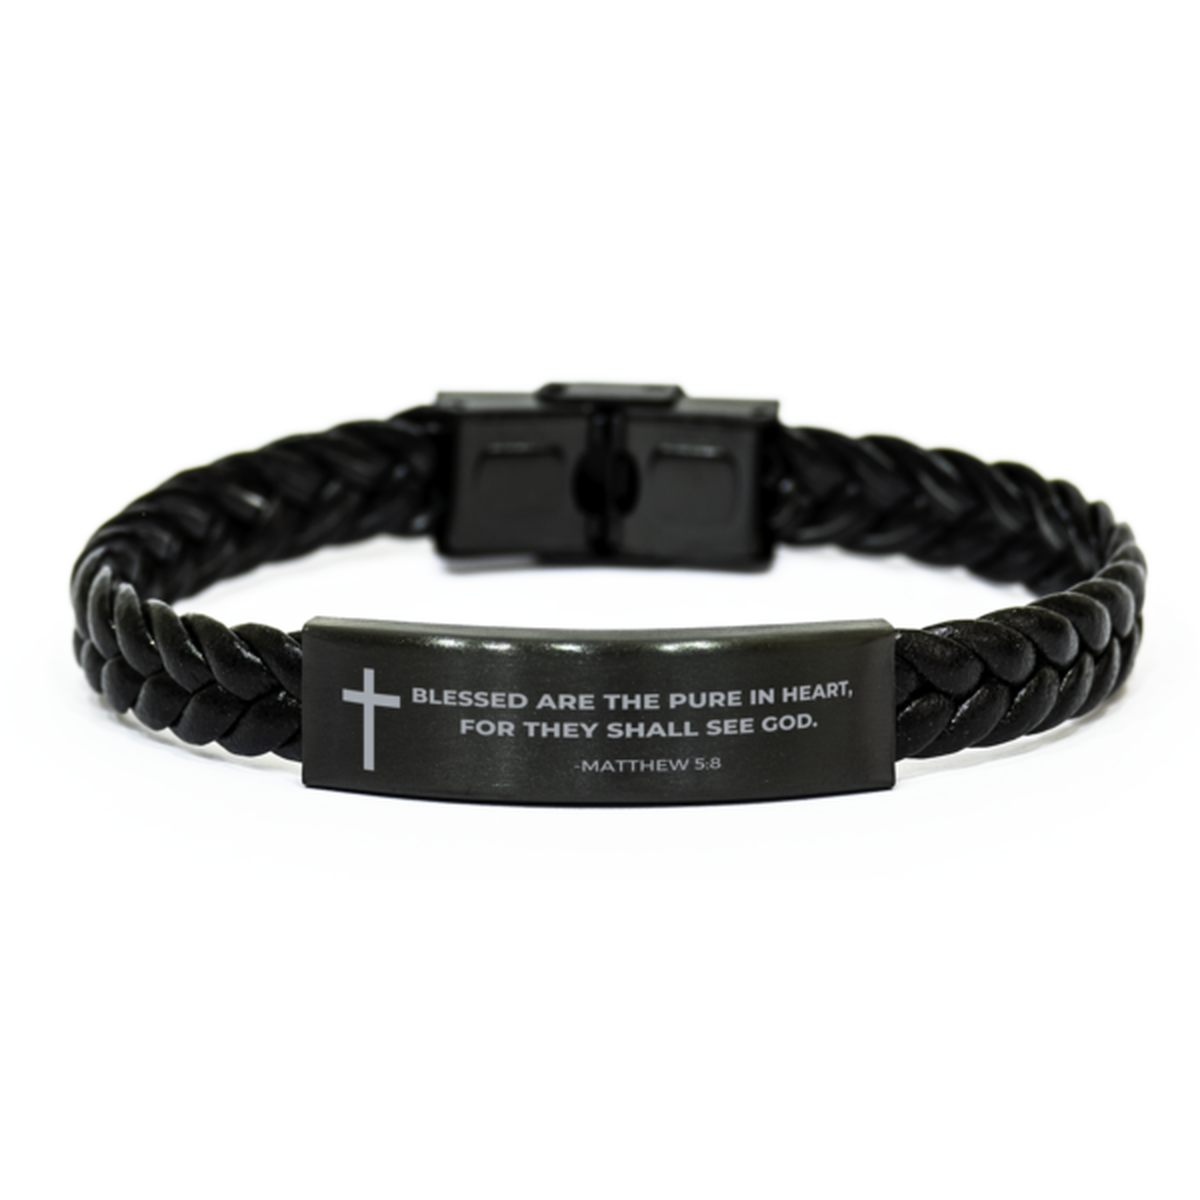 Baptism Gifts For Teenage Boys Girls, Christian Bible Verse Braided Leather Bracelet, Blessed are the pure in heart, Catholic Confirmation Gifts for Son, Godson, Grandson, Nephew